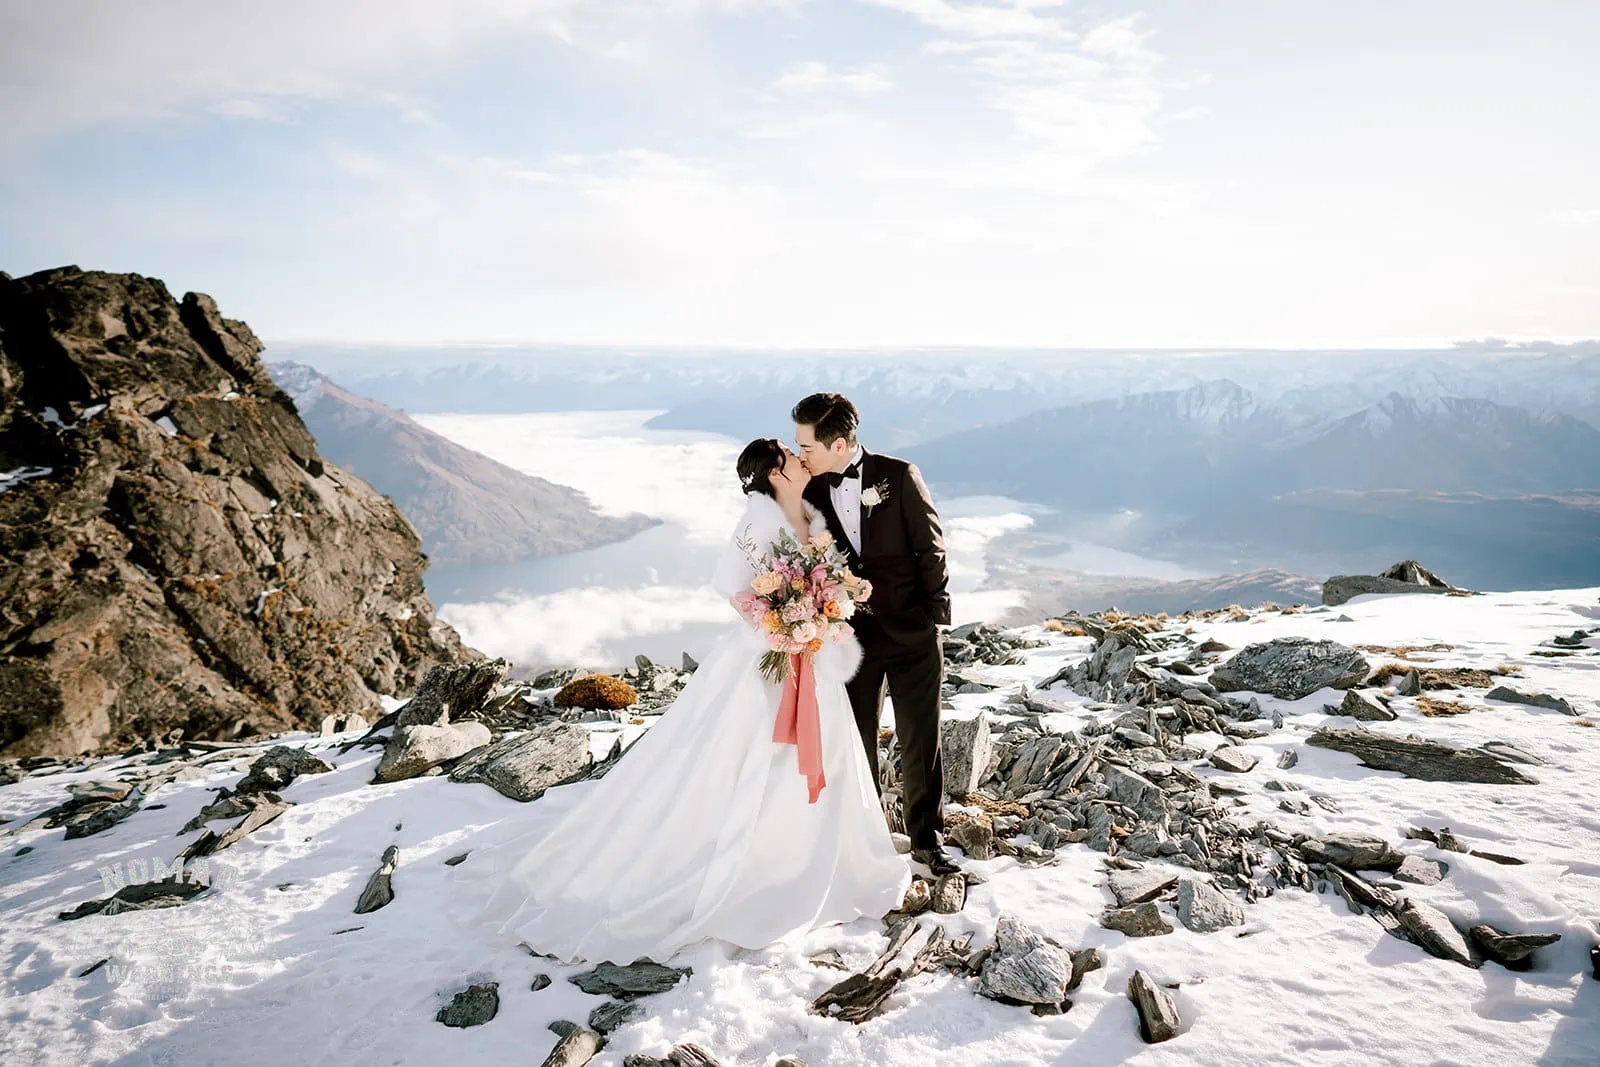 Queenstown New Zealand Elopement Wedding Photographer - Bo and Junyi's heli pre wedding shoot atop a snow covered mountain with 4 landings.